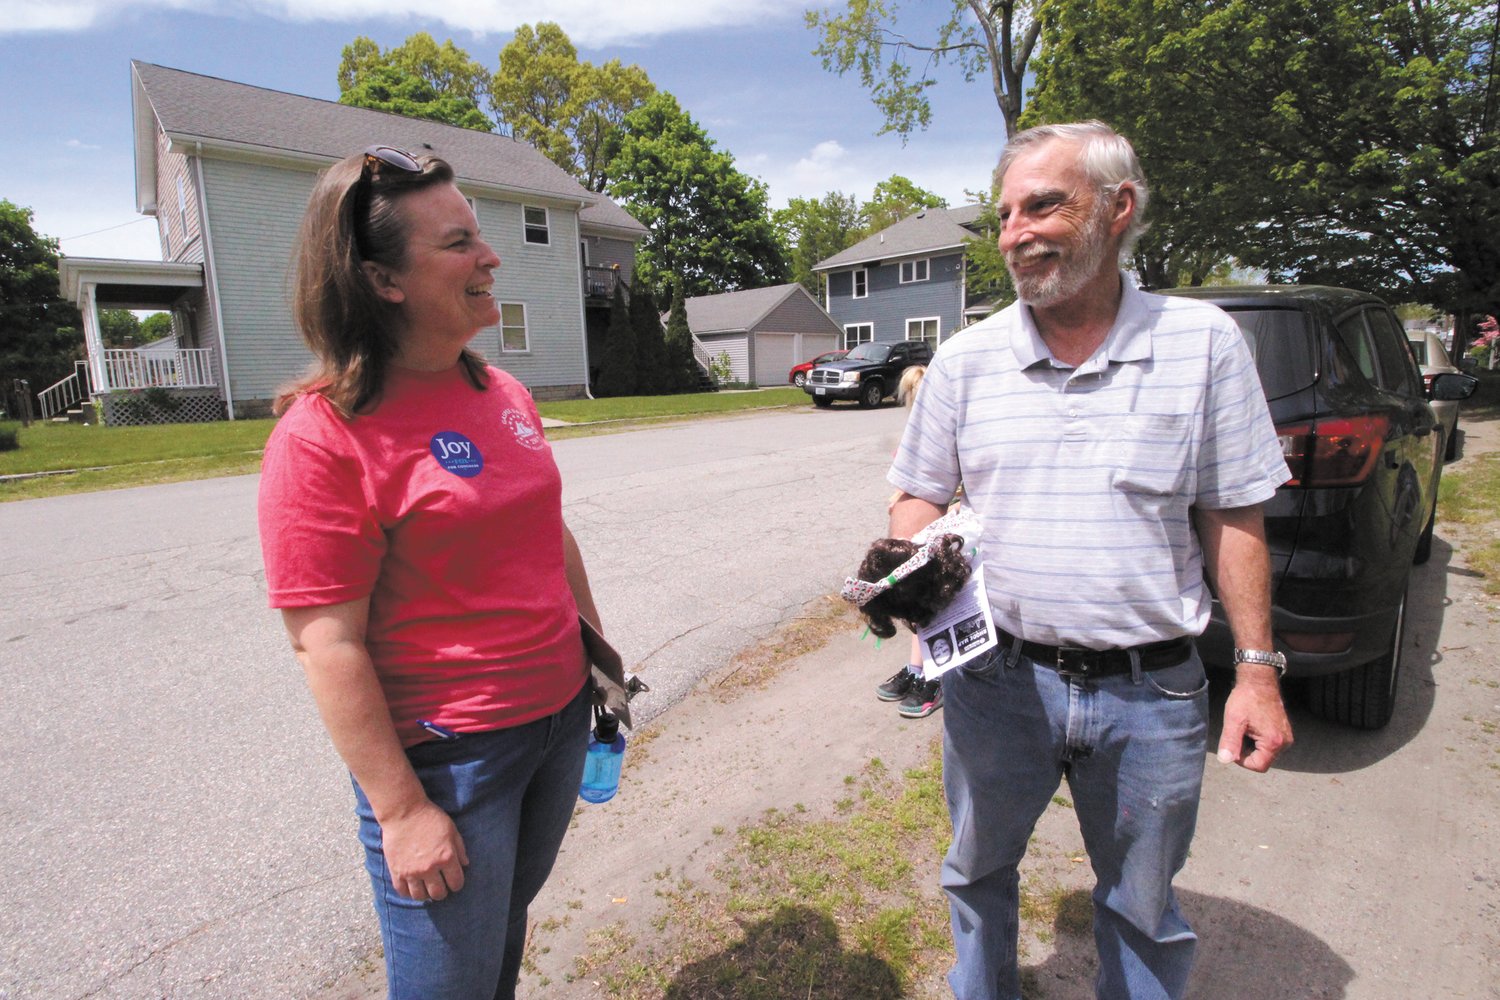 NO LACK OF OPINION: Warwick resident Dan Kugler offers his views of what’s not working to Congressional District 2 Democratic candidate Joy Fox, as Fox walked the Norwood neighborhood Saturday.